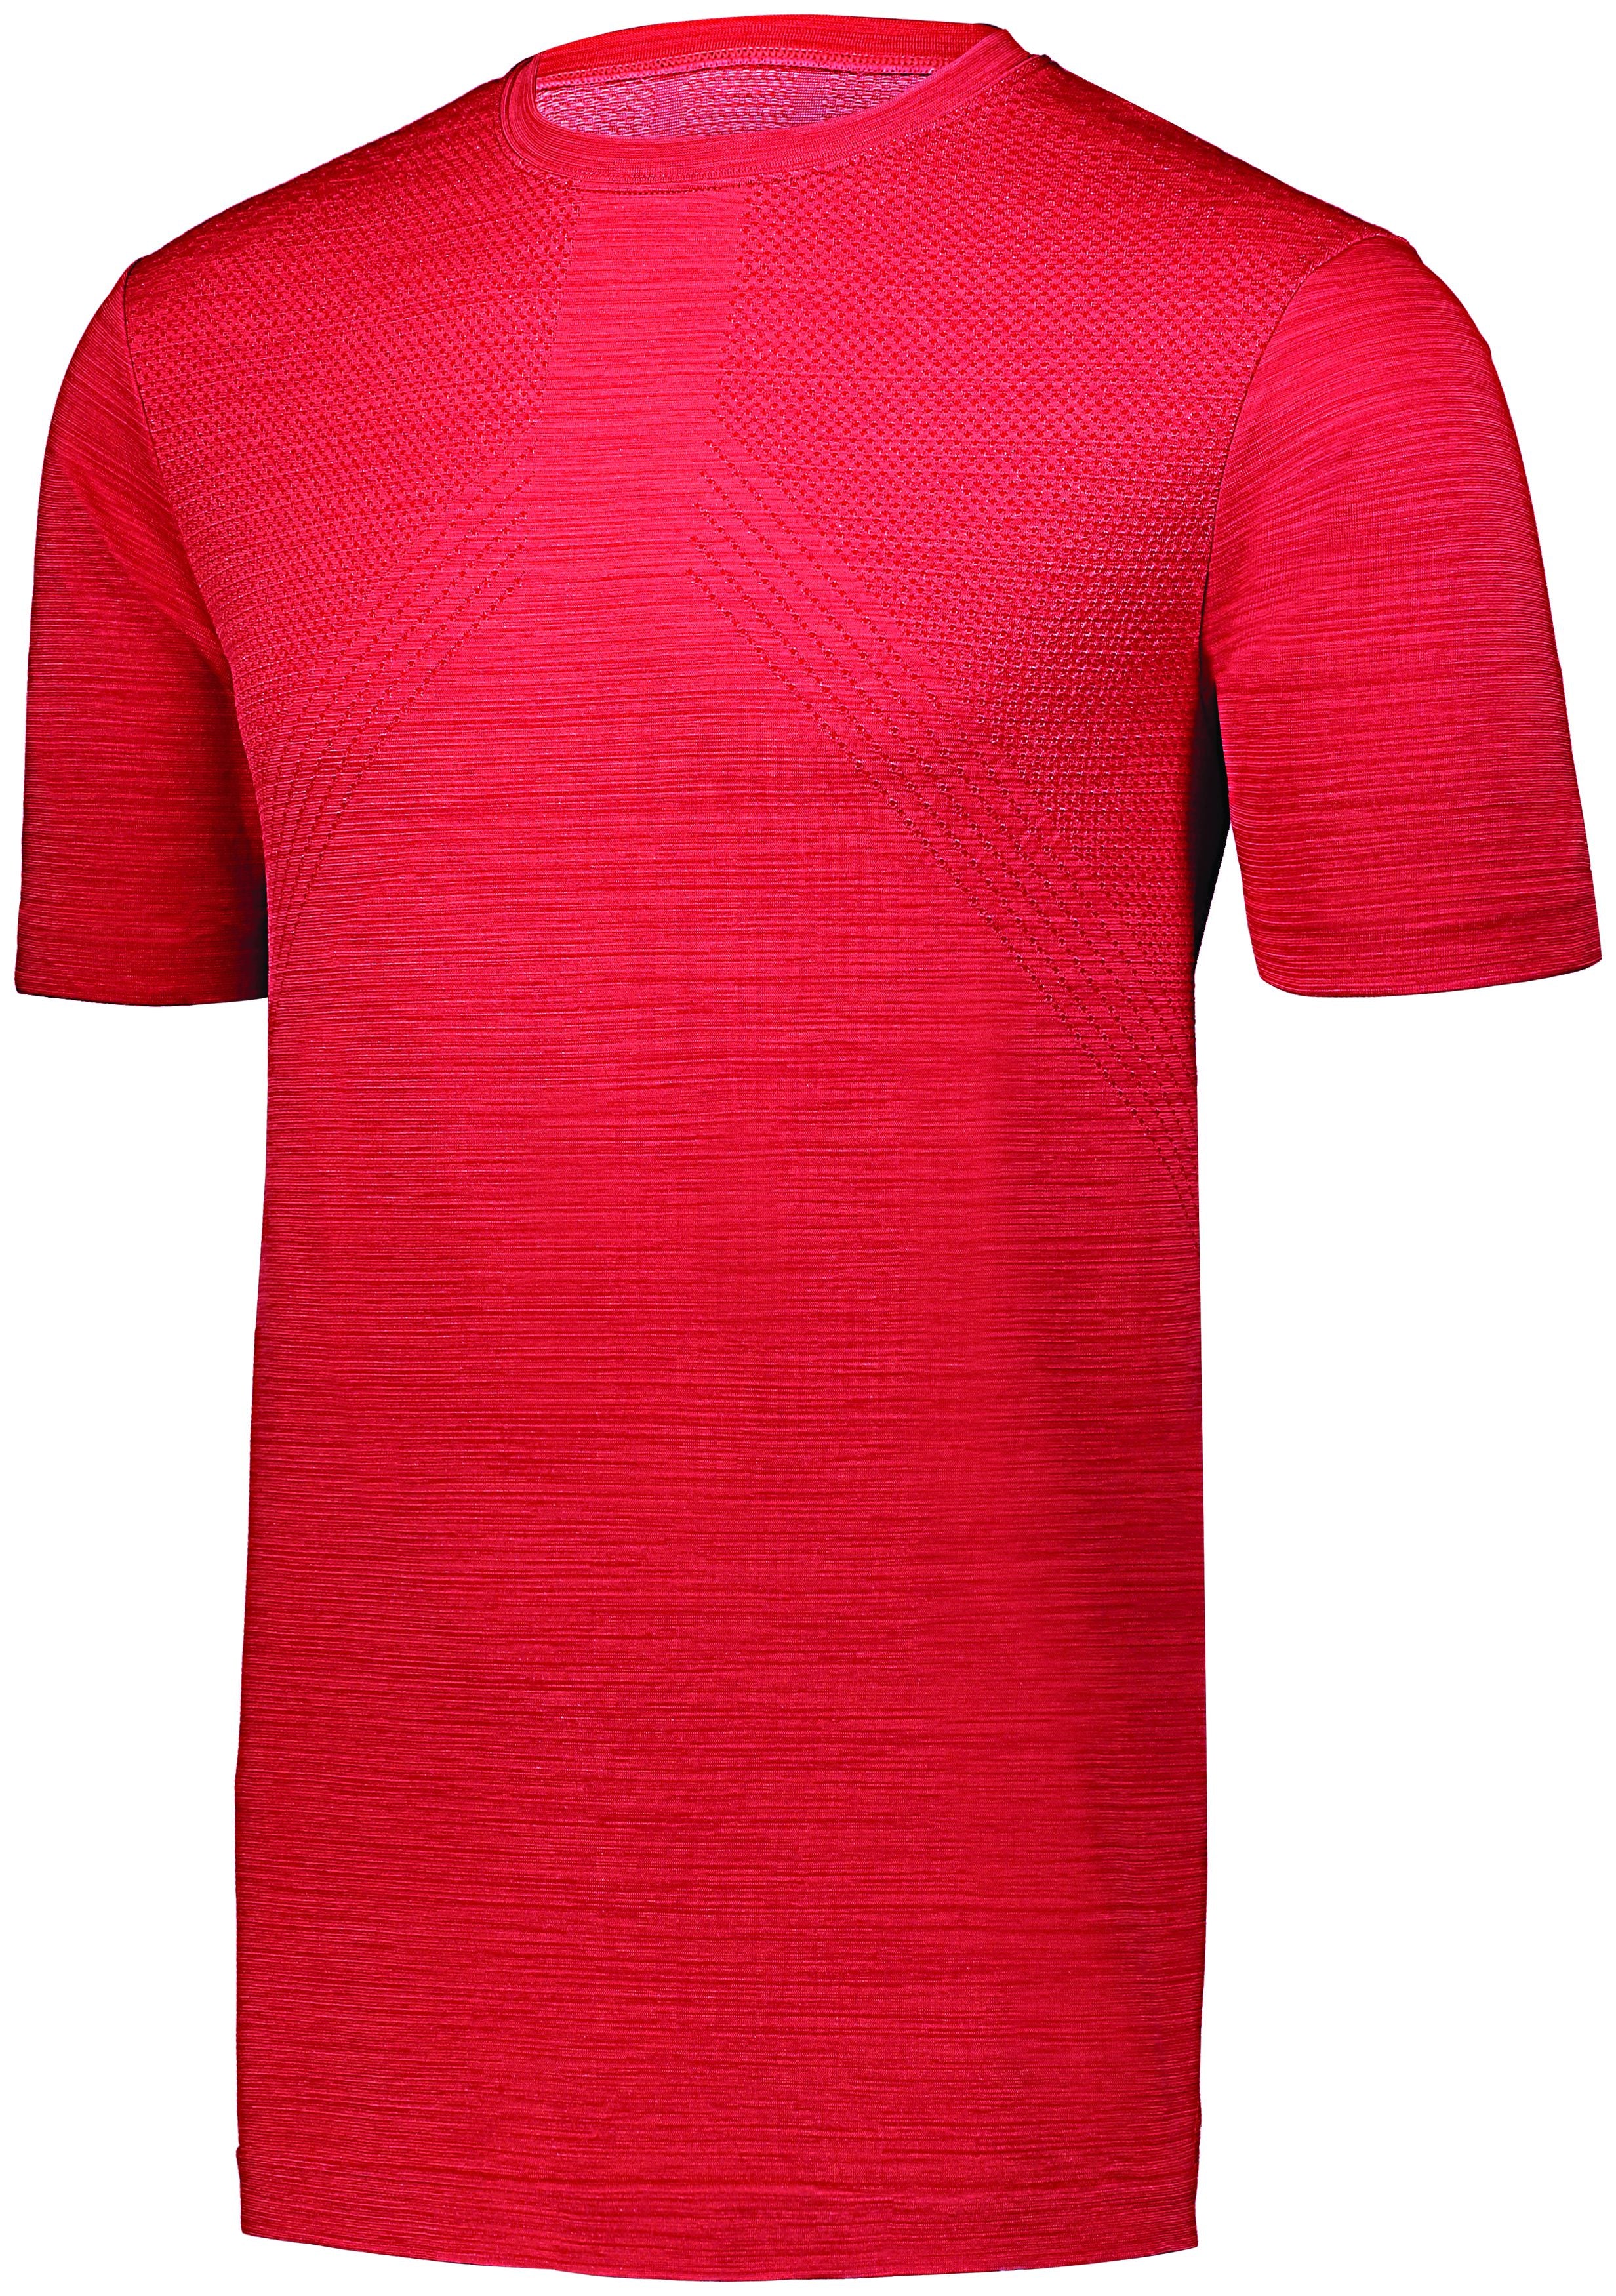 Holloway Striated Shirt Short Sleeve in Scarlet  -Part of the Adult, Holloway, Shirts, Striated-Collection product lines at KanaleyCreations.com